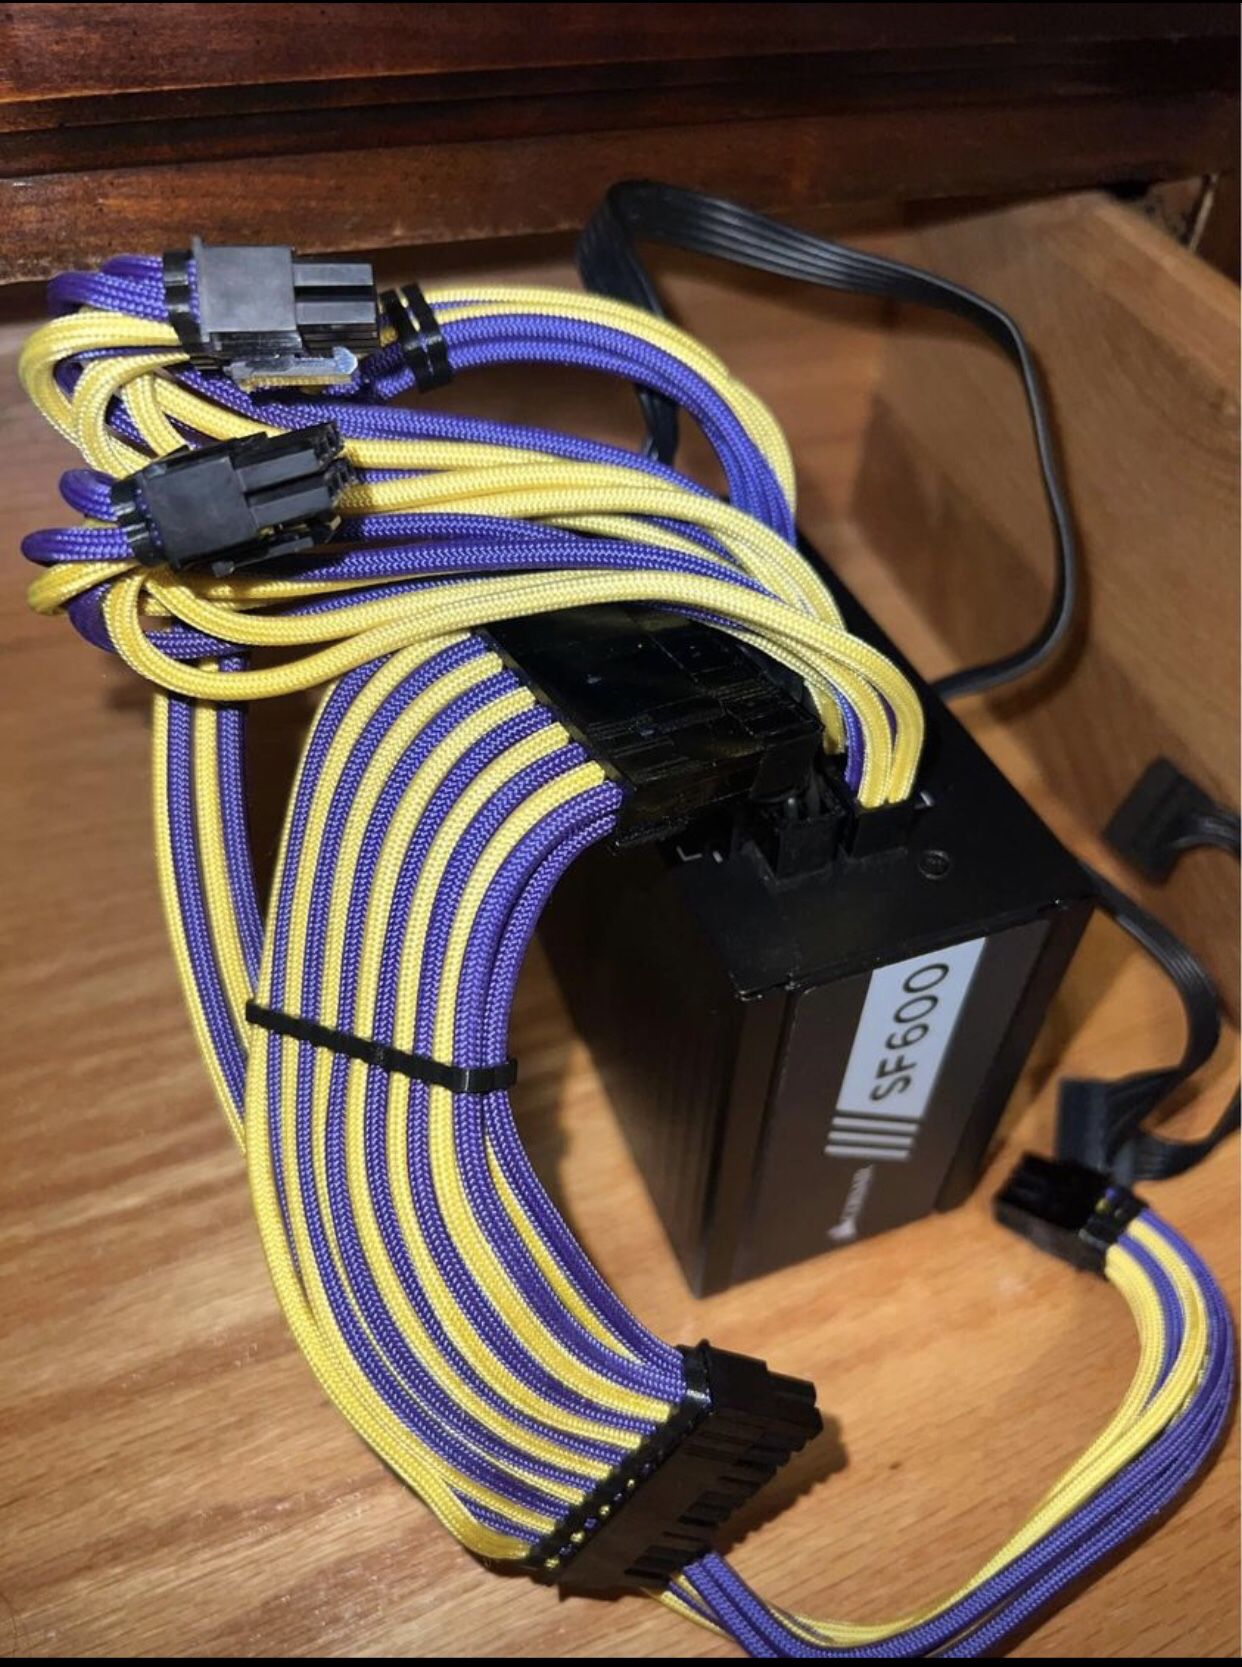 Corsair SF600 PSU With Custom Cables 